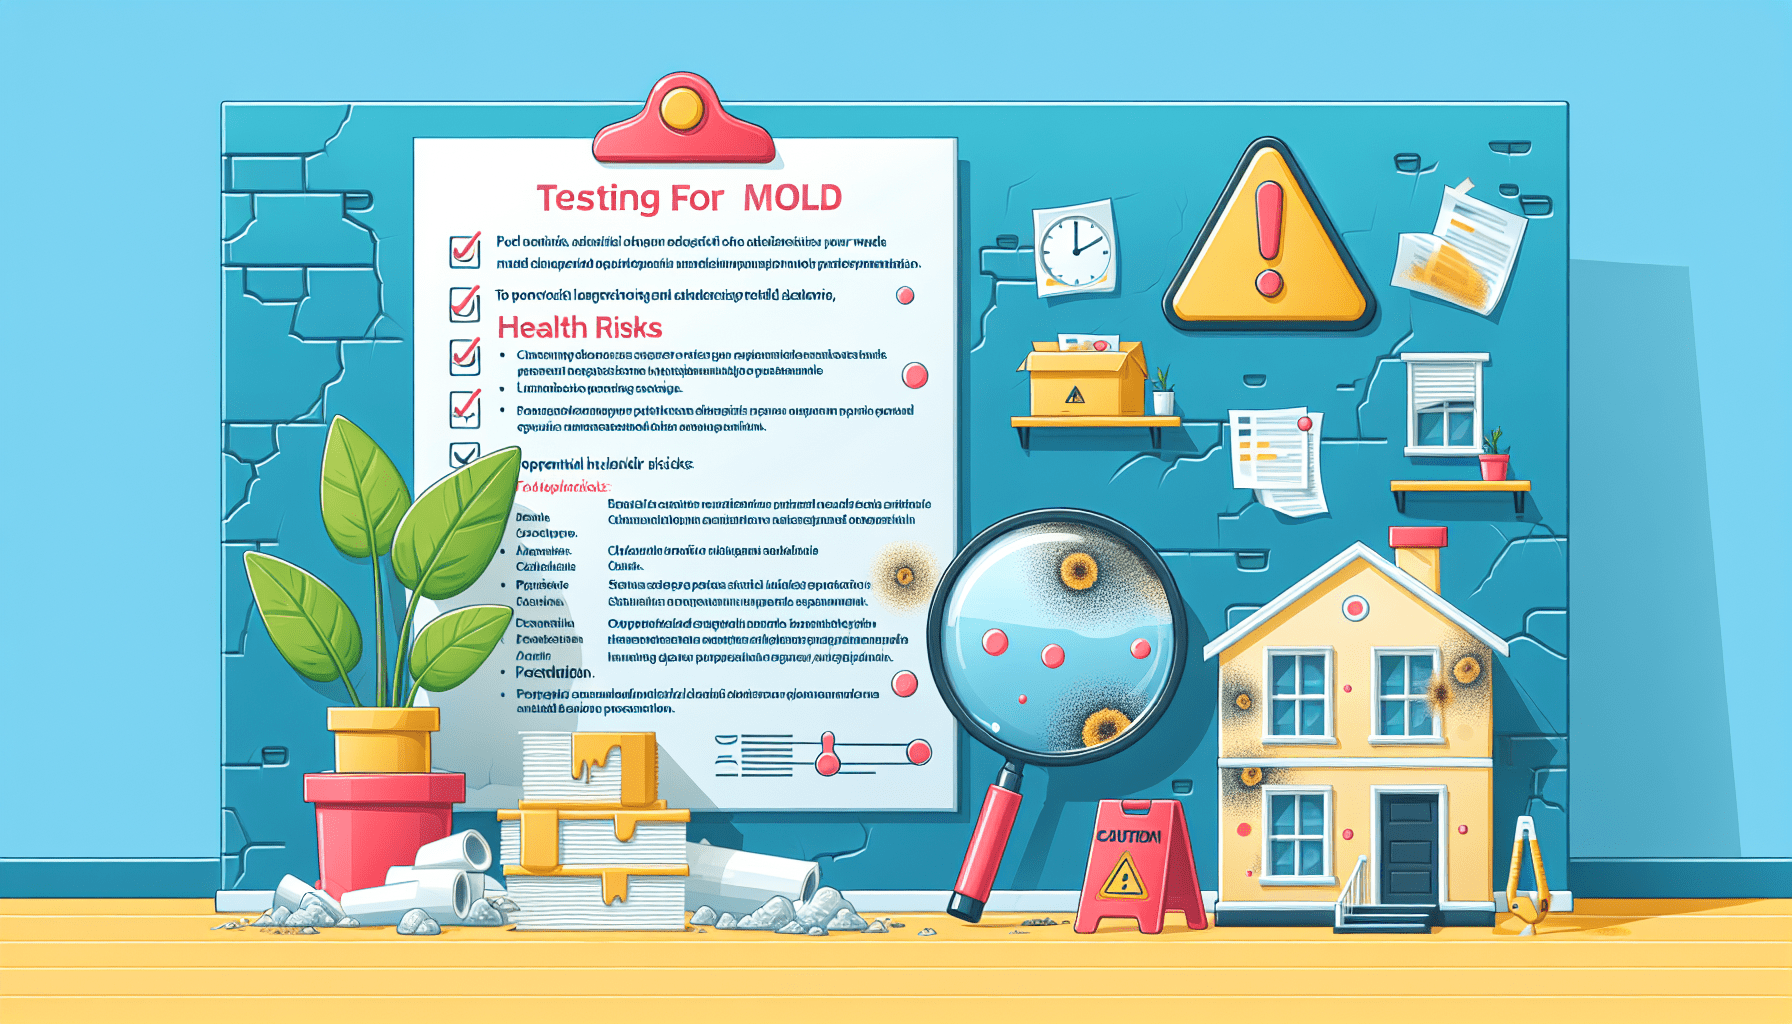 Why You Should Test for Mold in Your Home